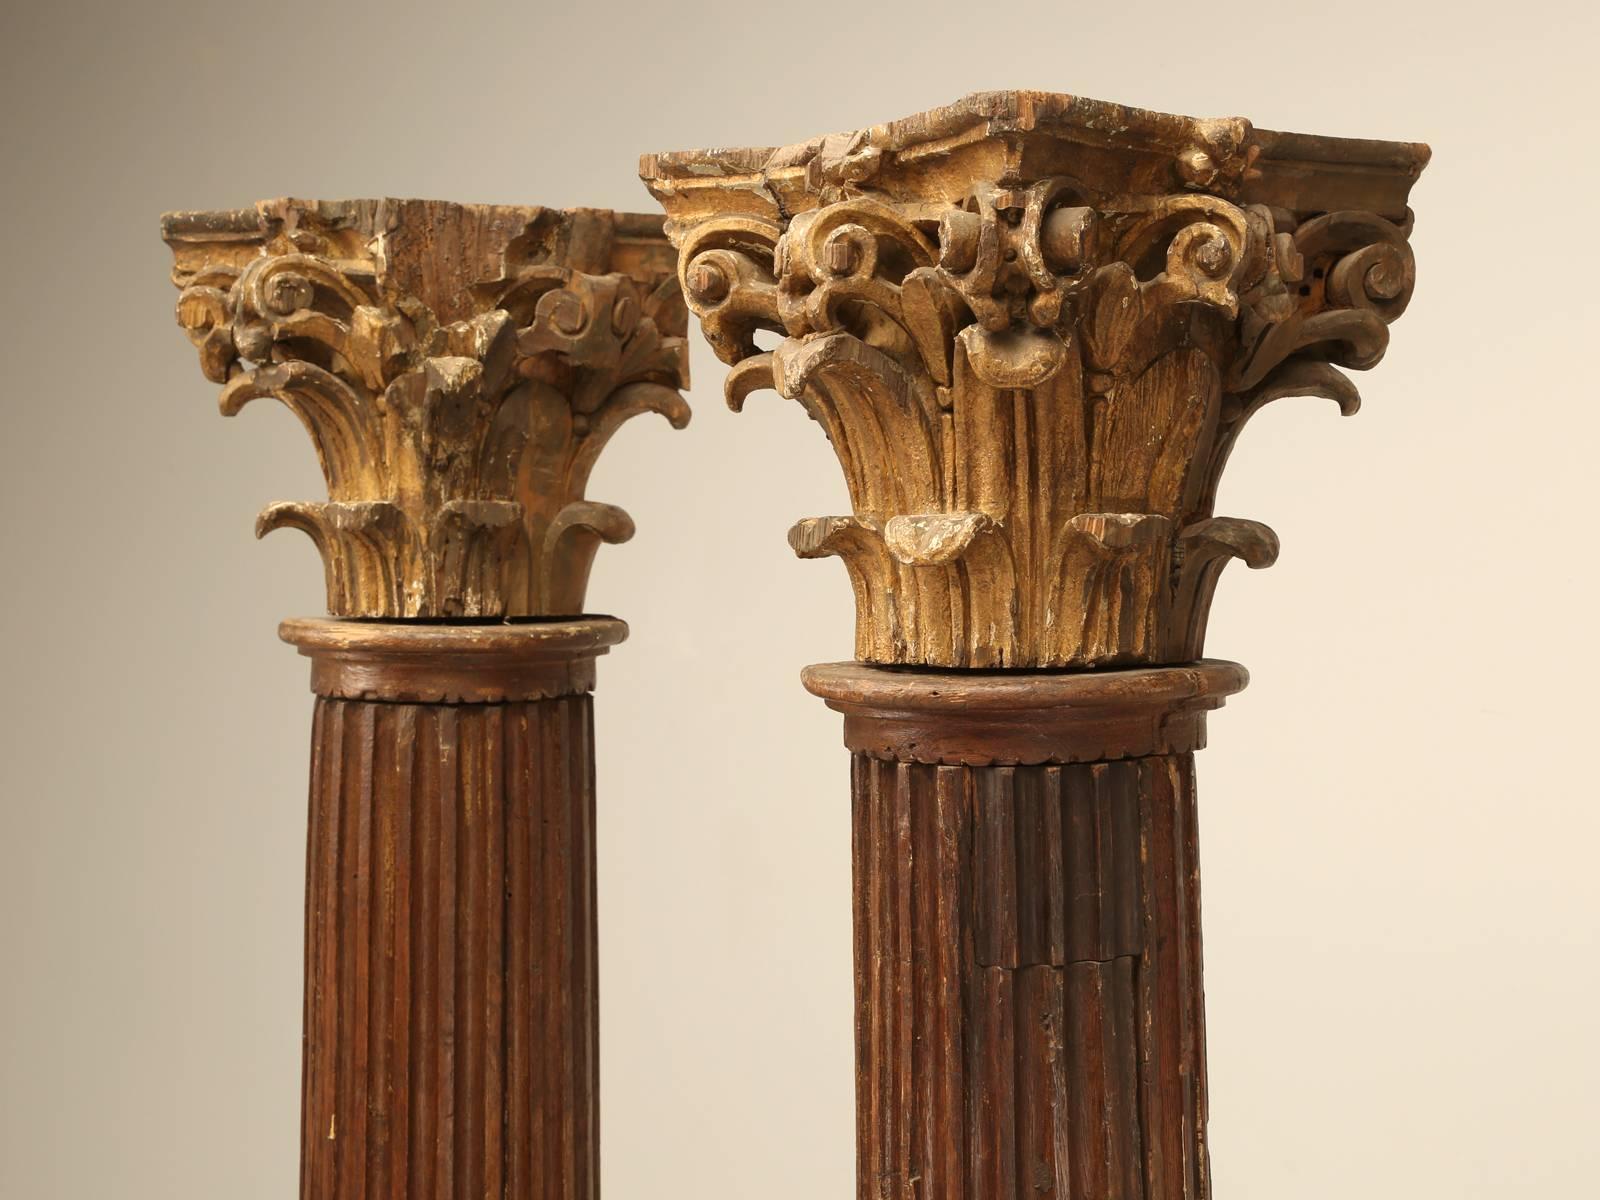 Circa 1800-1820 French fluted oak beautifully hand-carved corinthian columns in their original finish with gilded capitals. We purposely left the columns in as found condition, and can restore them to any level you would like. They can also be